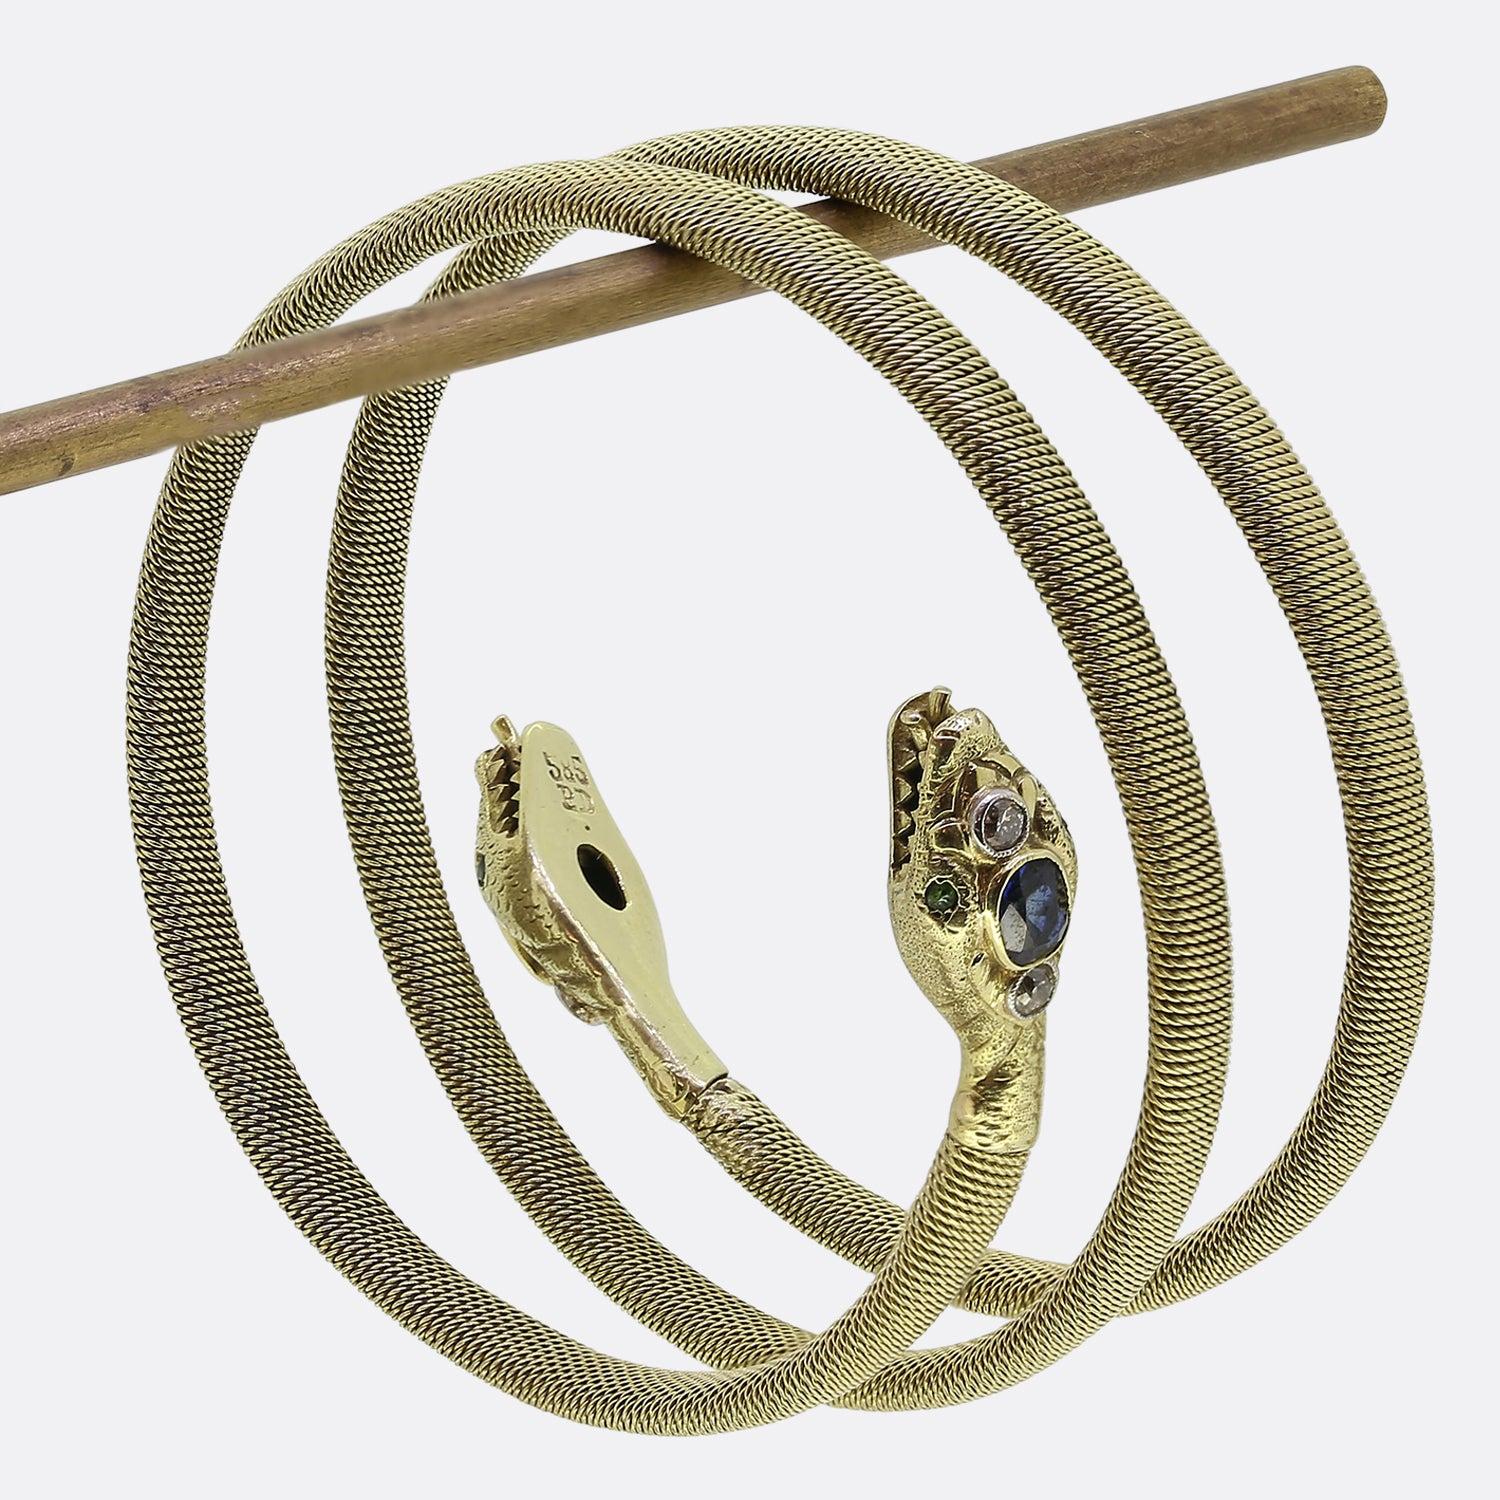 Here we have a wonderfully crafted gem set snake bracelet from the Victorian era. Crafted in 14ct yellow gold, this antique piece coils around the wearer’s wrist and features a flexible body with a secure steel spring inside. Between an intricately